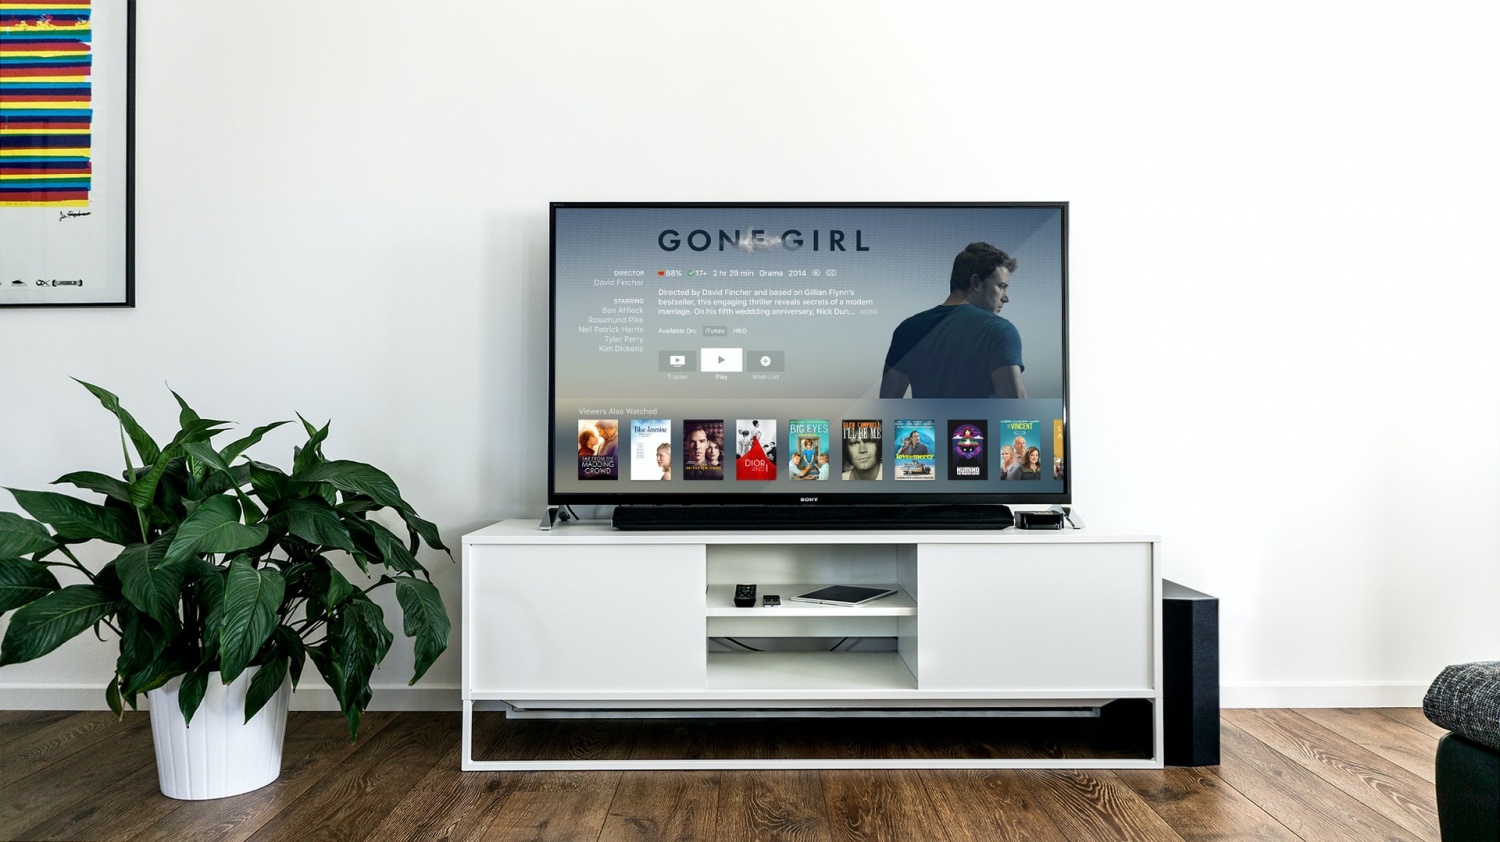 Google TV Brings Multi-User Profile Support | No More Overlapping of Saved Movies